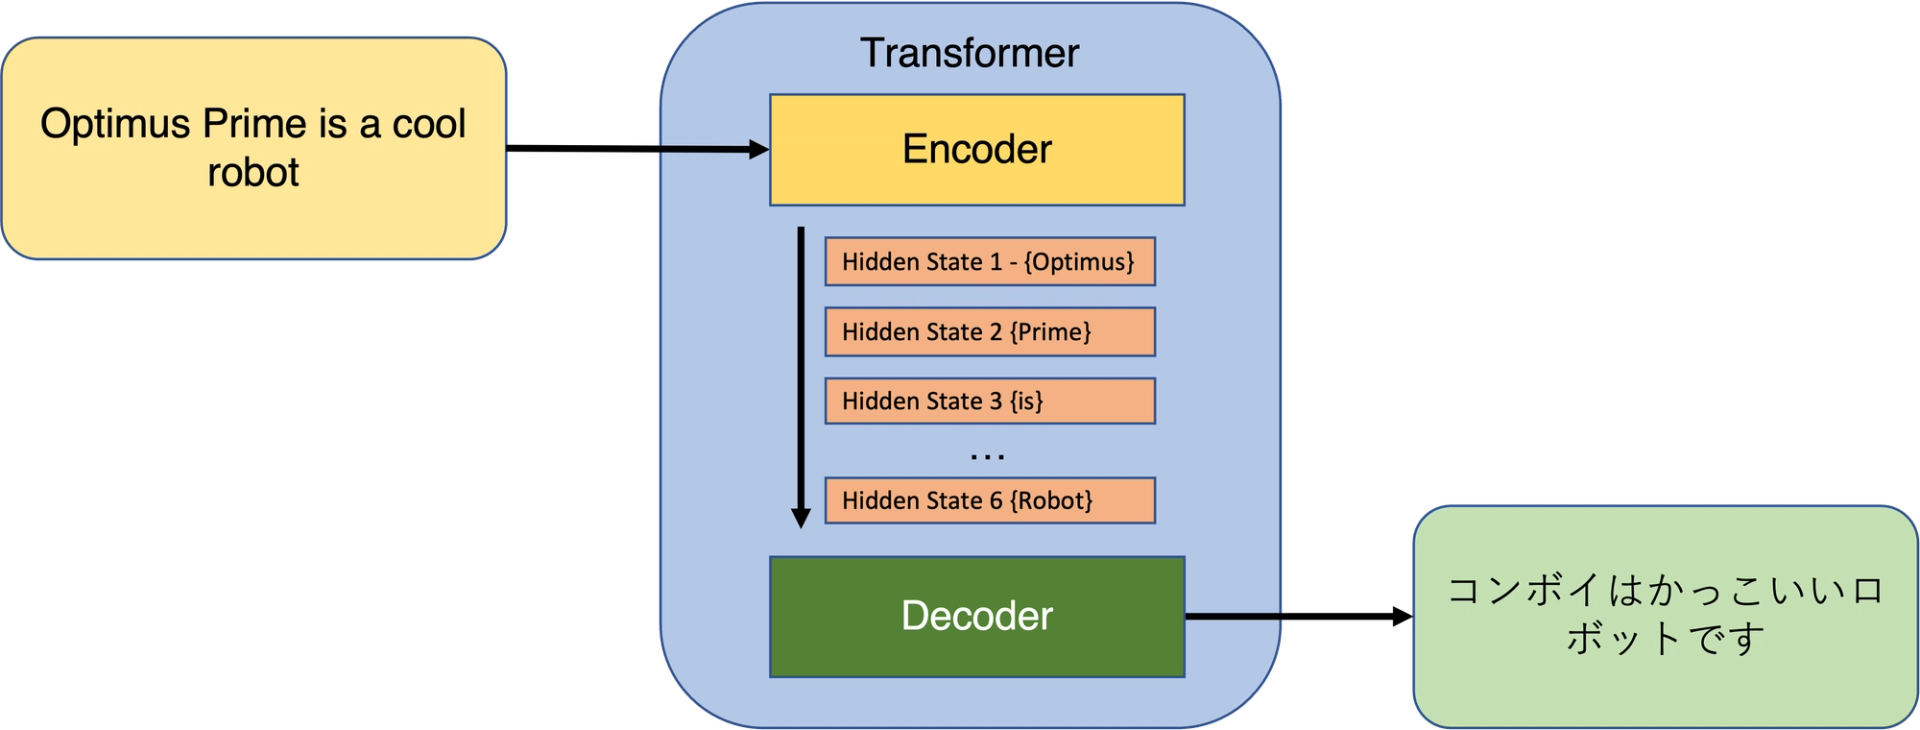 Hidden states from encoding to decoding in a transformer model